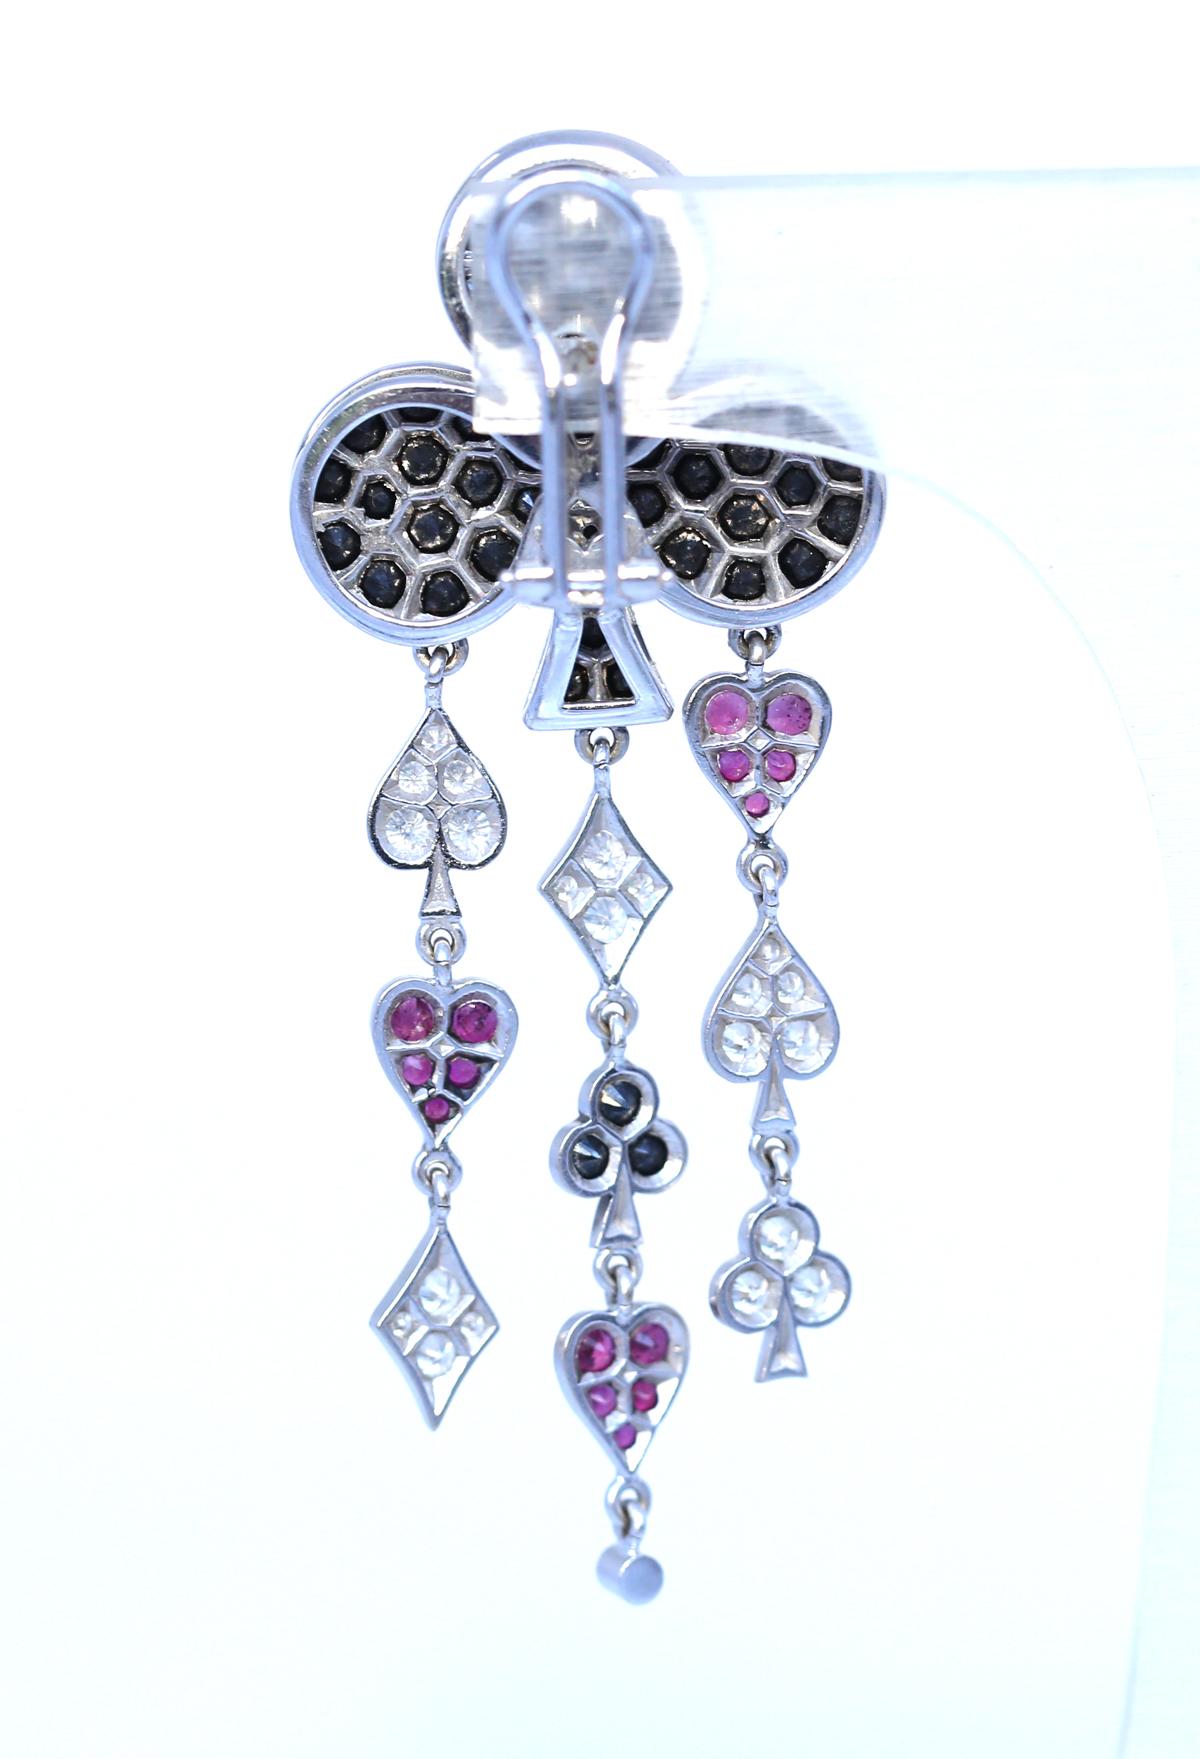 Round Cut Leon Popov Cards Suit Hearts Clubs Rubies Diamonds White Gold Earrings, 2005